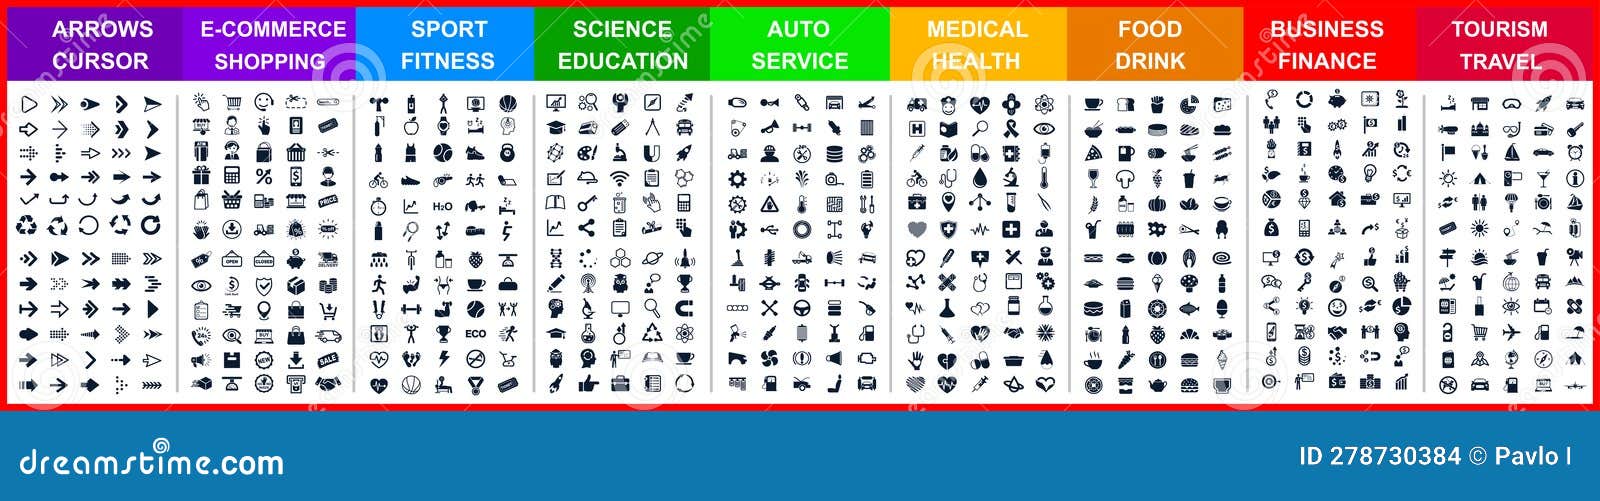 big set icons by category: arrows, shopping, sport, science, auto, medical, food drink, business, travel and many more